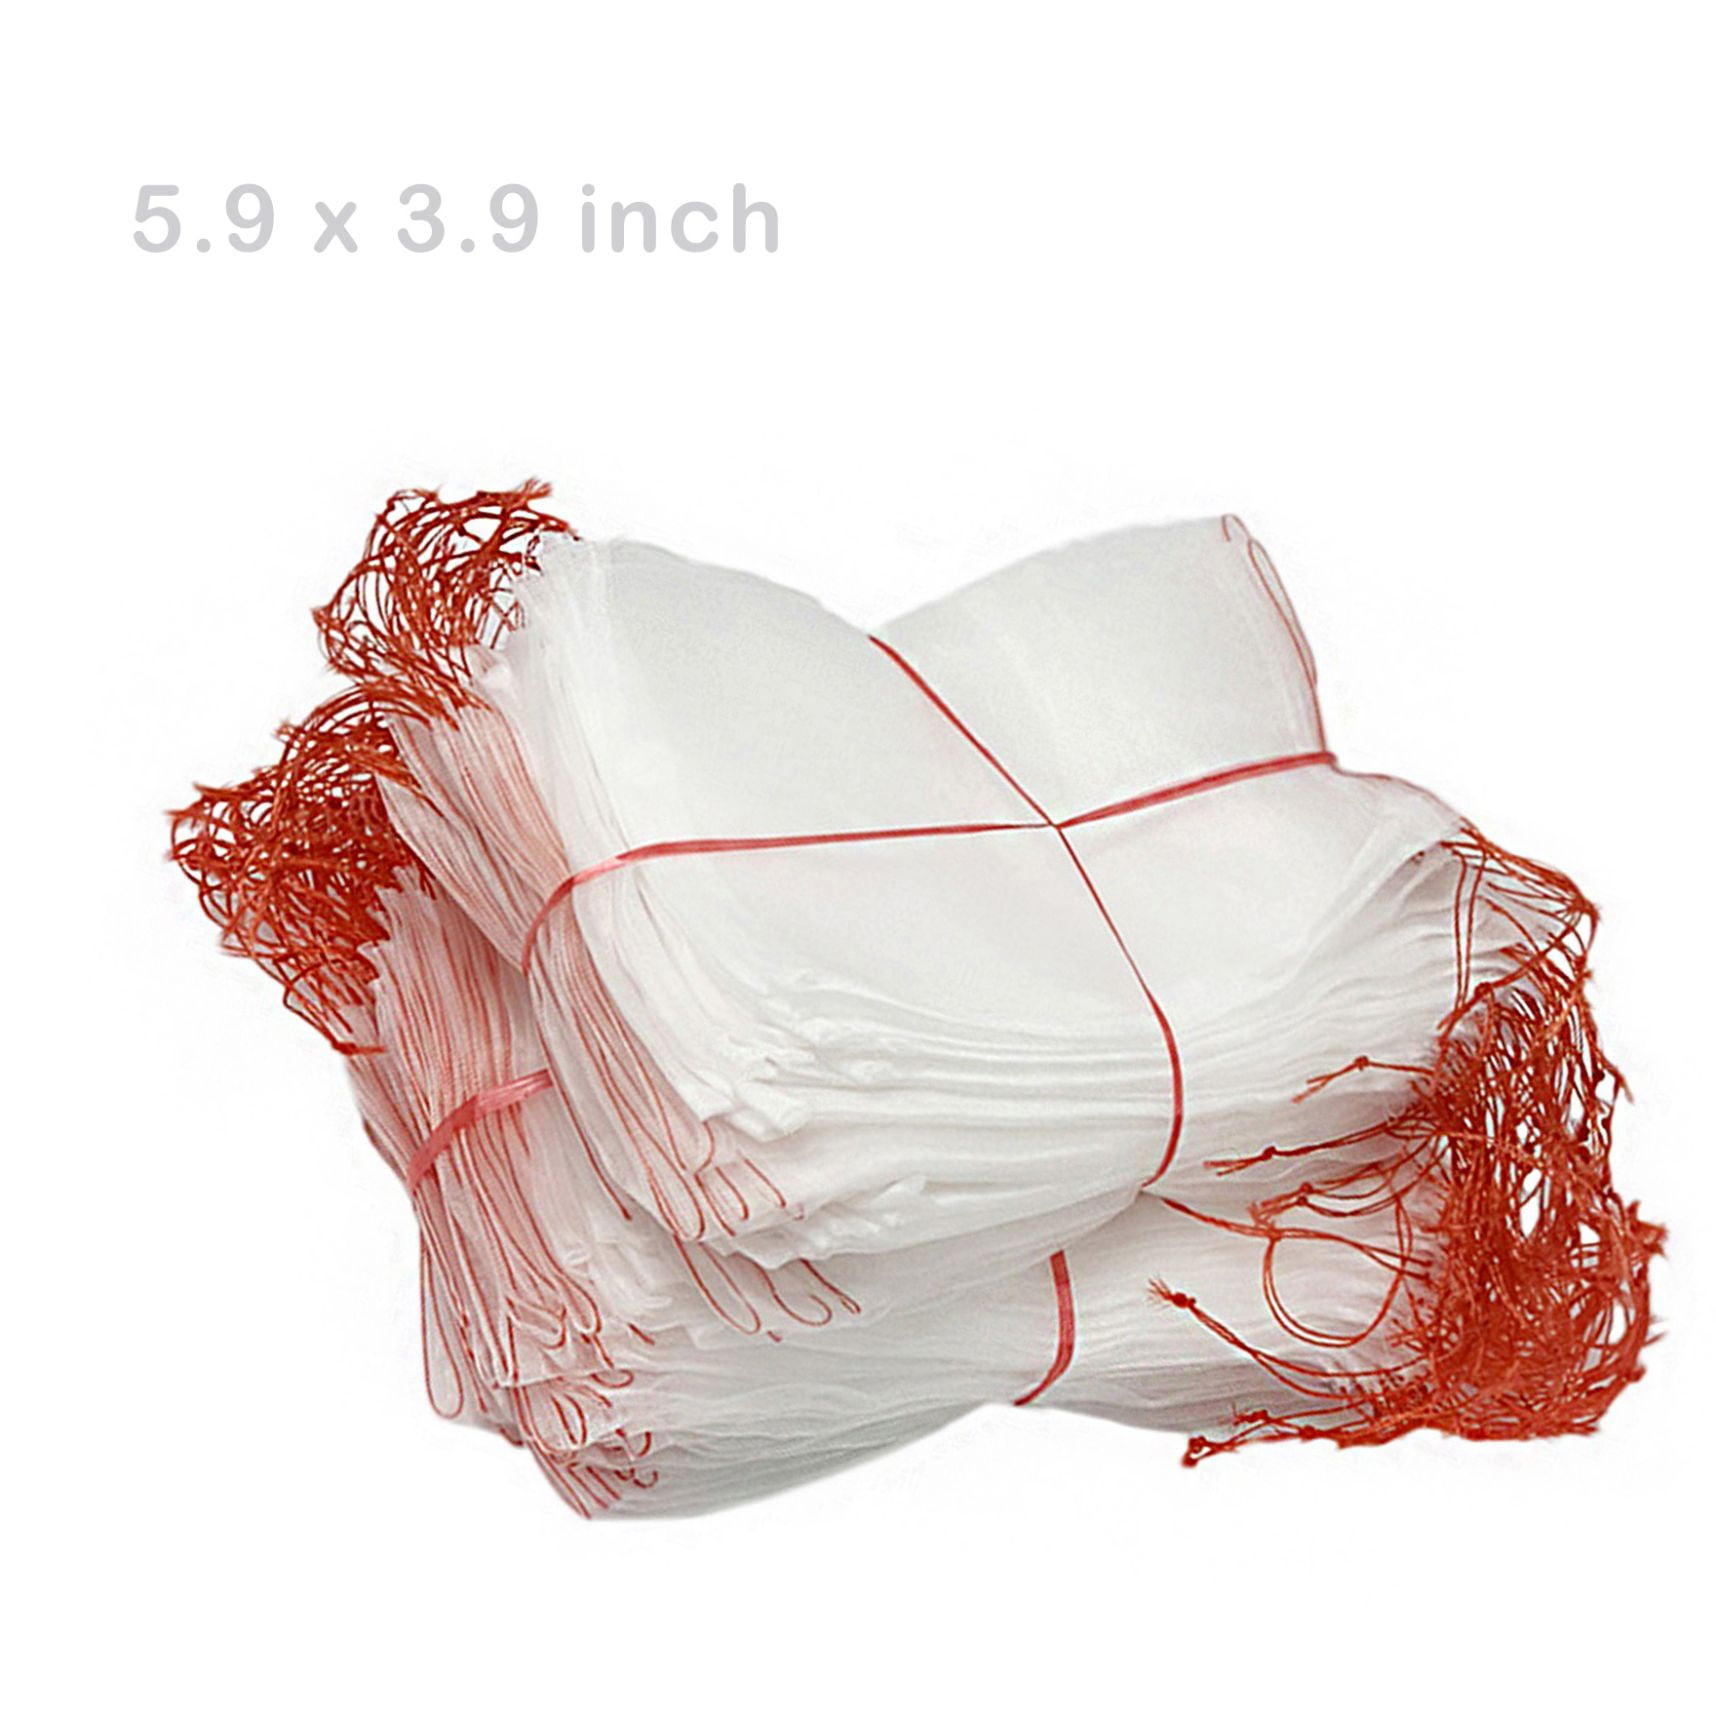 100 Pcs Garden Plant Nets Fruit Protect Drawstring Net Bags Mesh Against Insect 